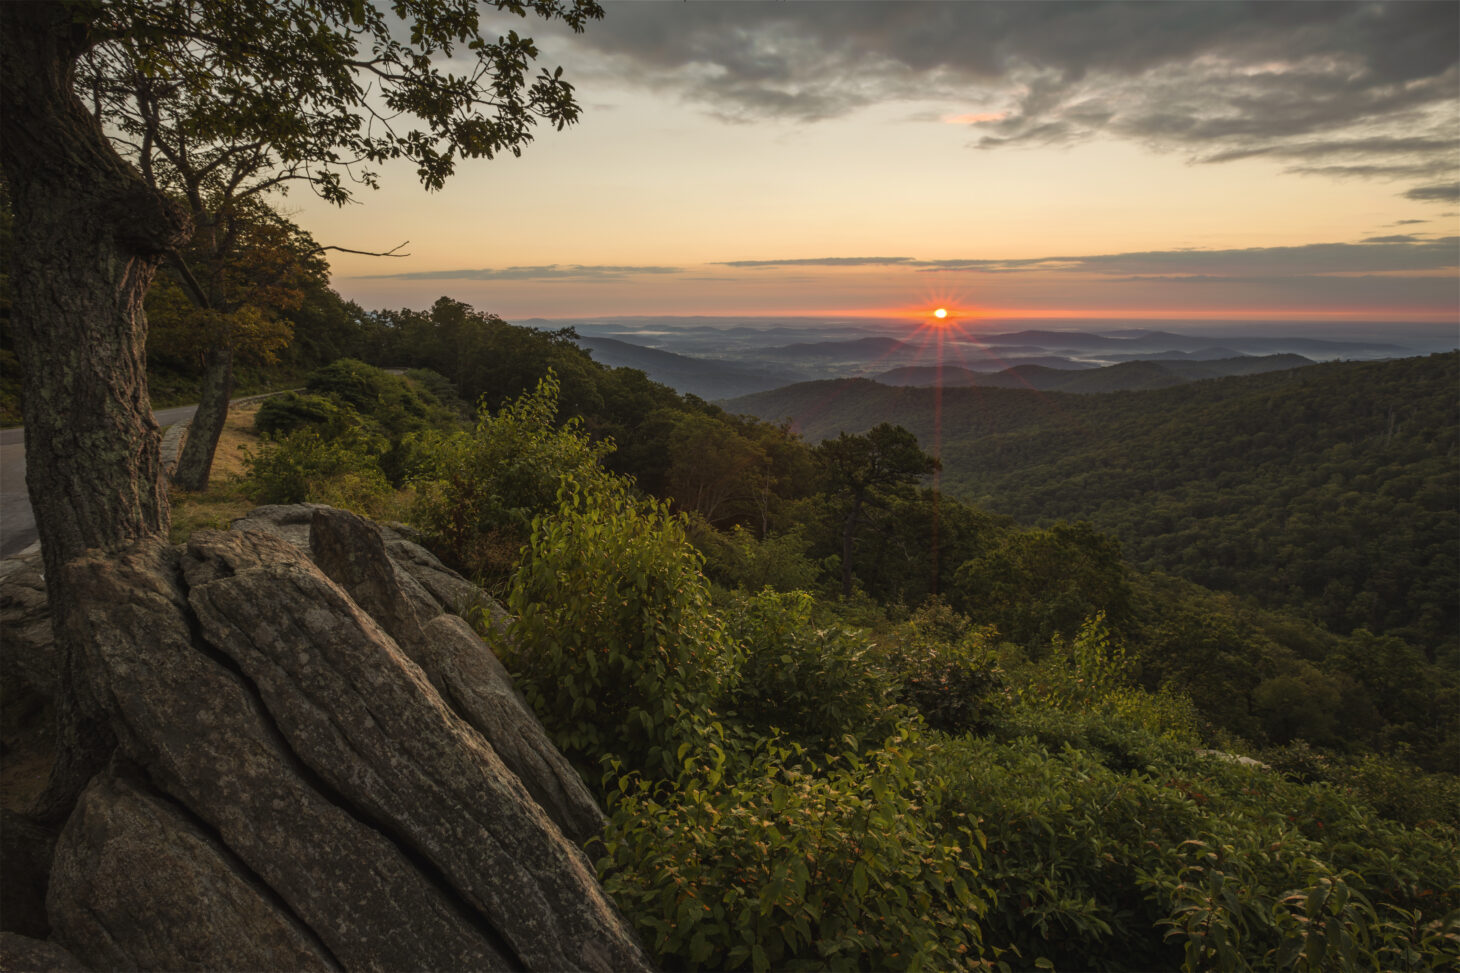 Sunrise from a mountain overlook at Shenandoah National Park